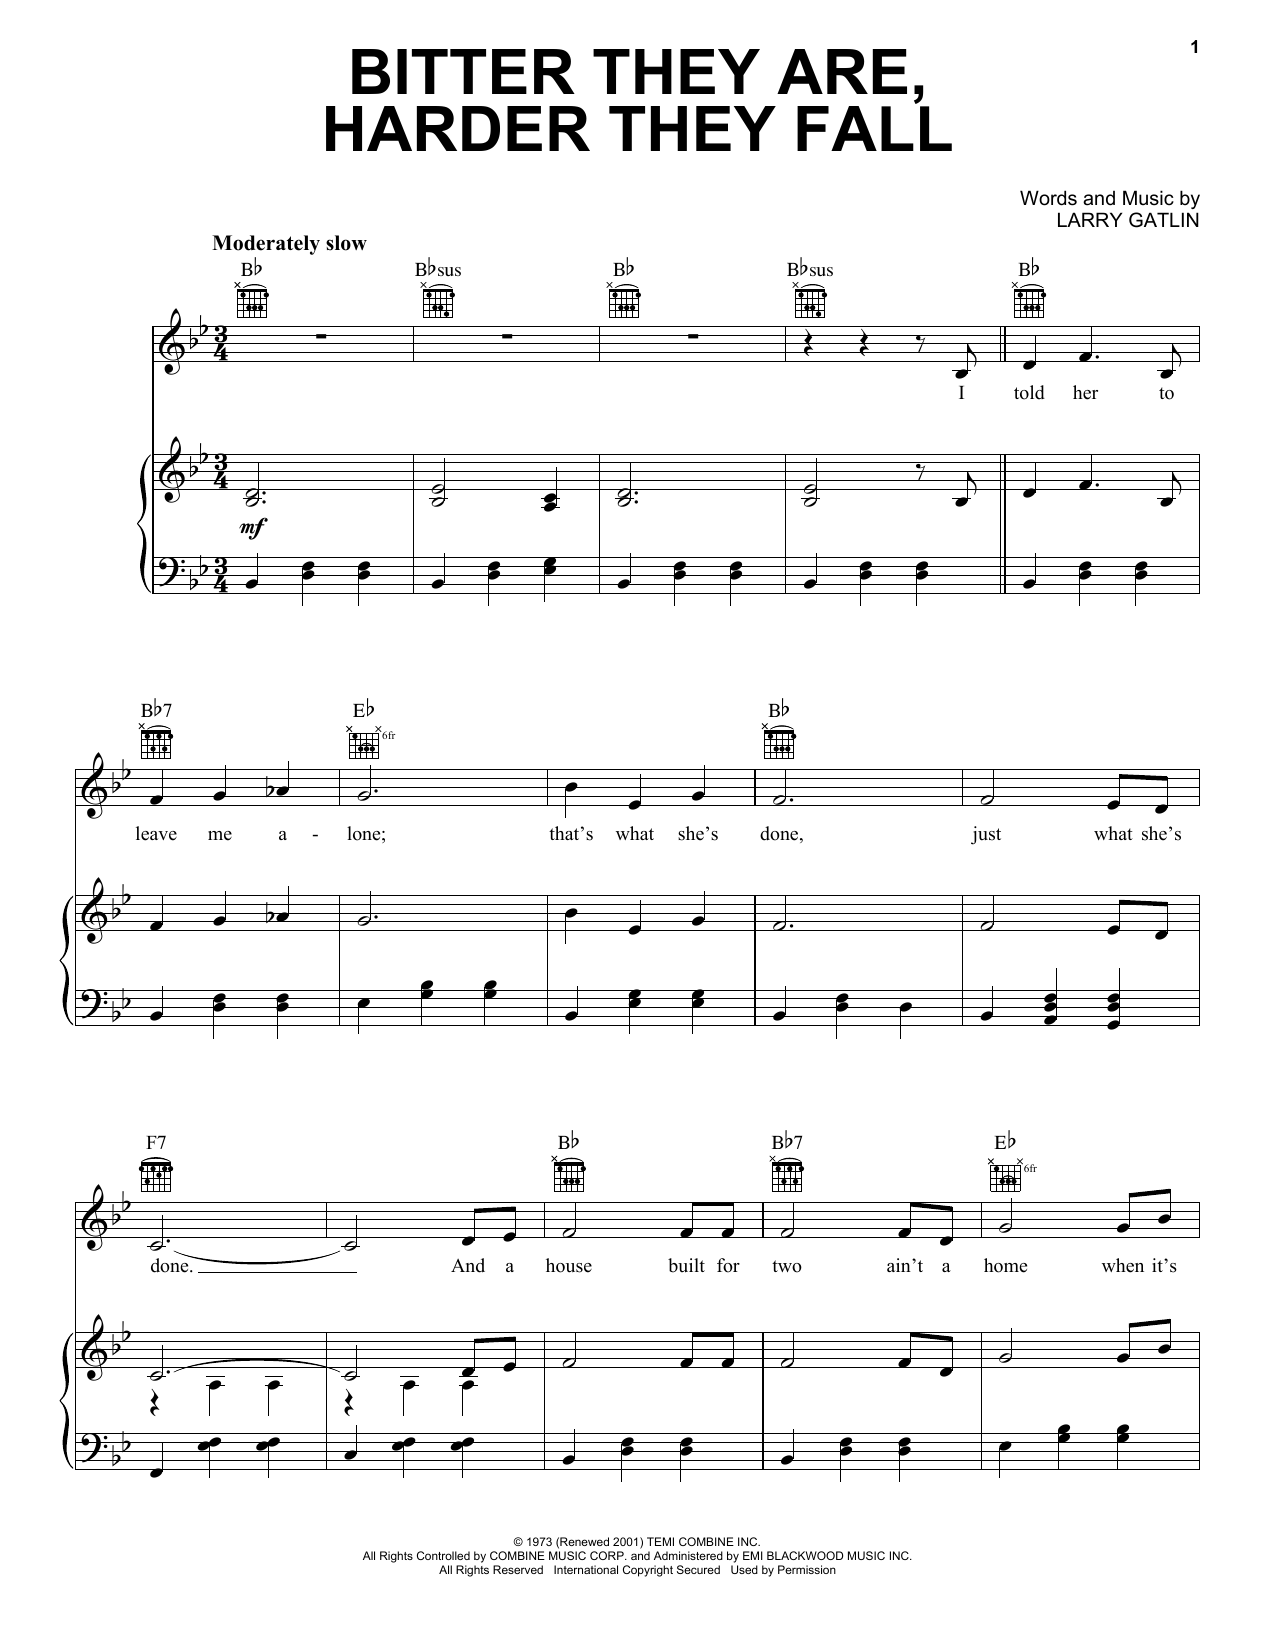 Download Elvis Presley Bitter They Are, Harder They Fall Sheet Music